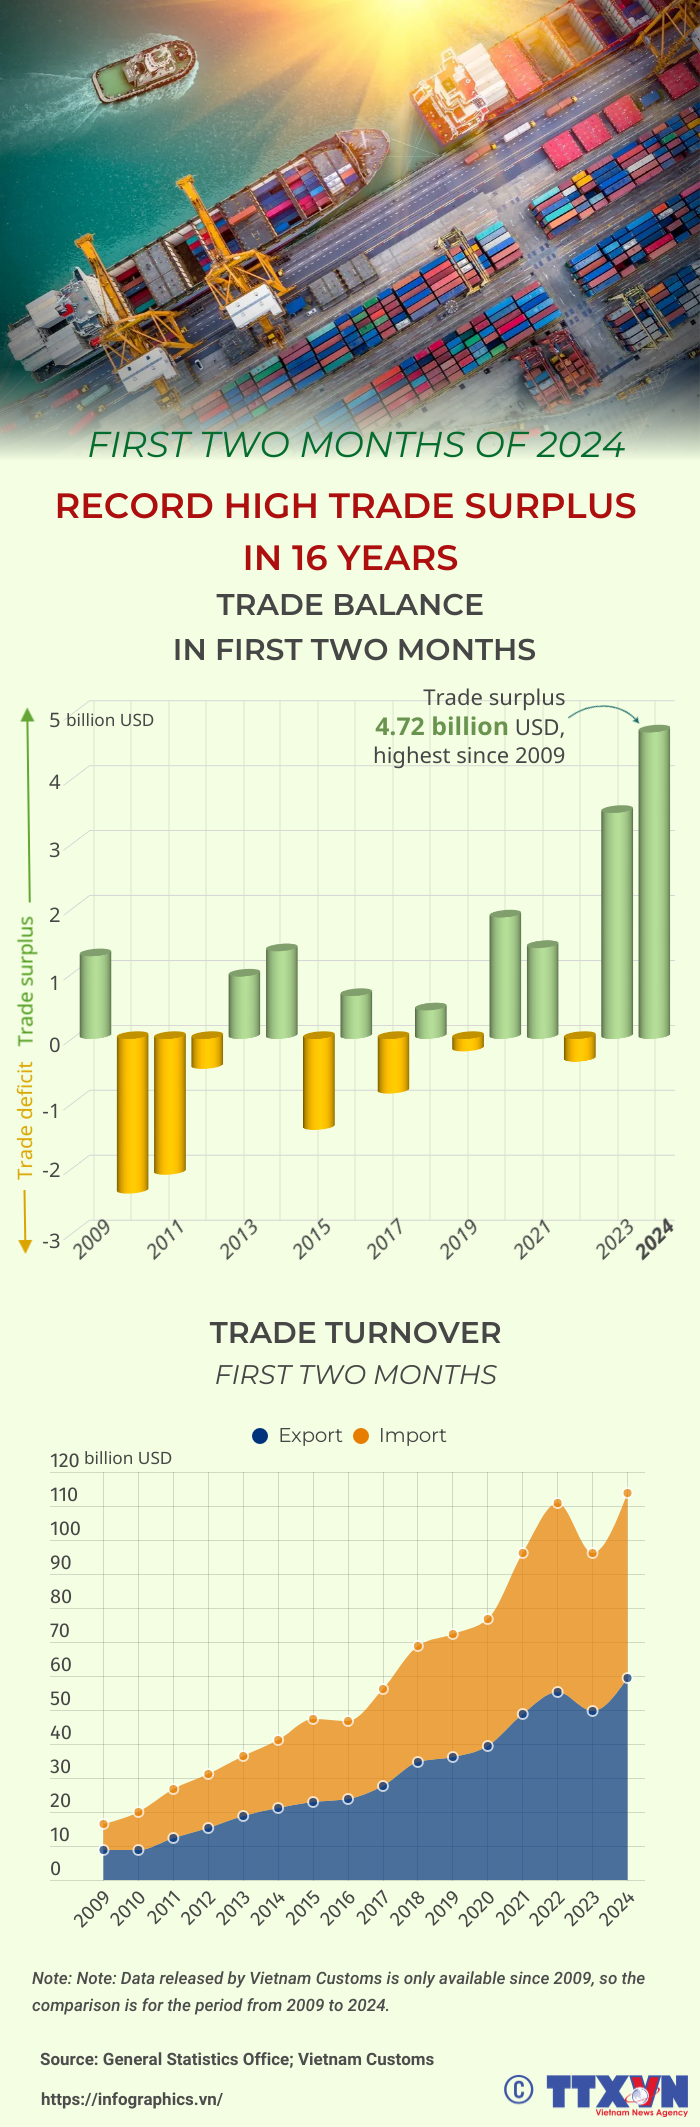 Record trade surplus since 2009 in first two months